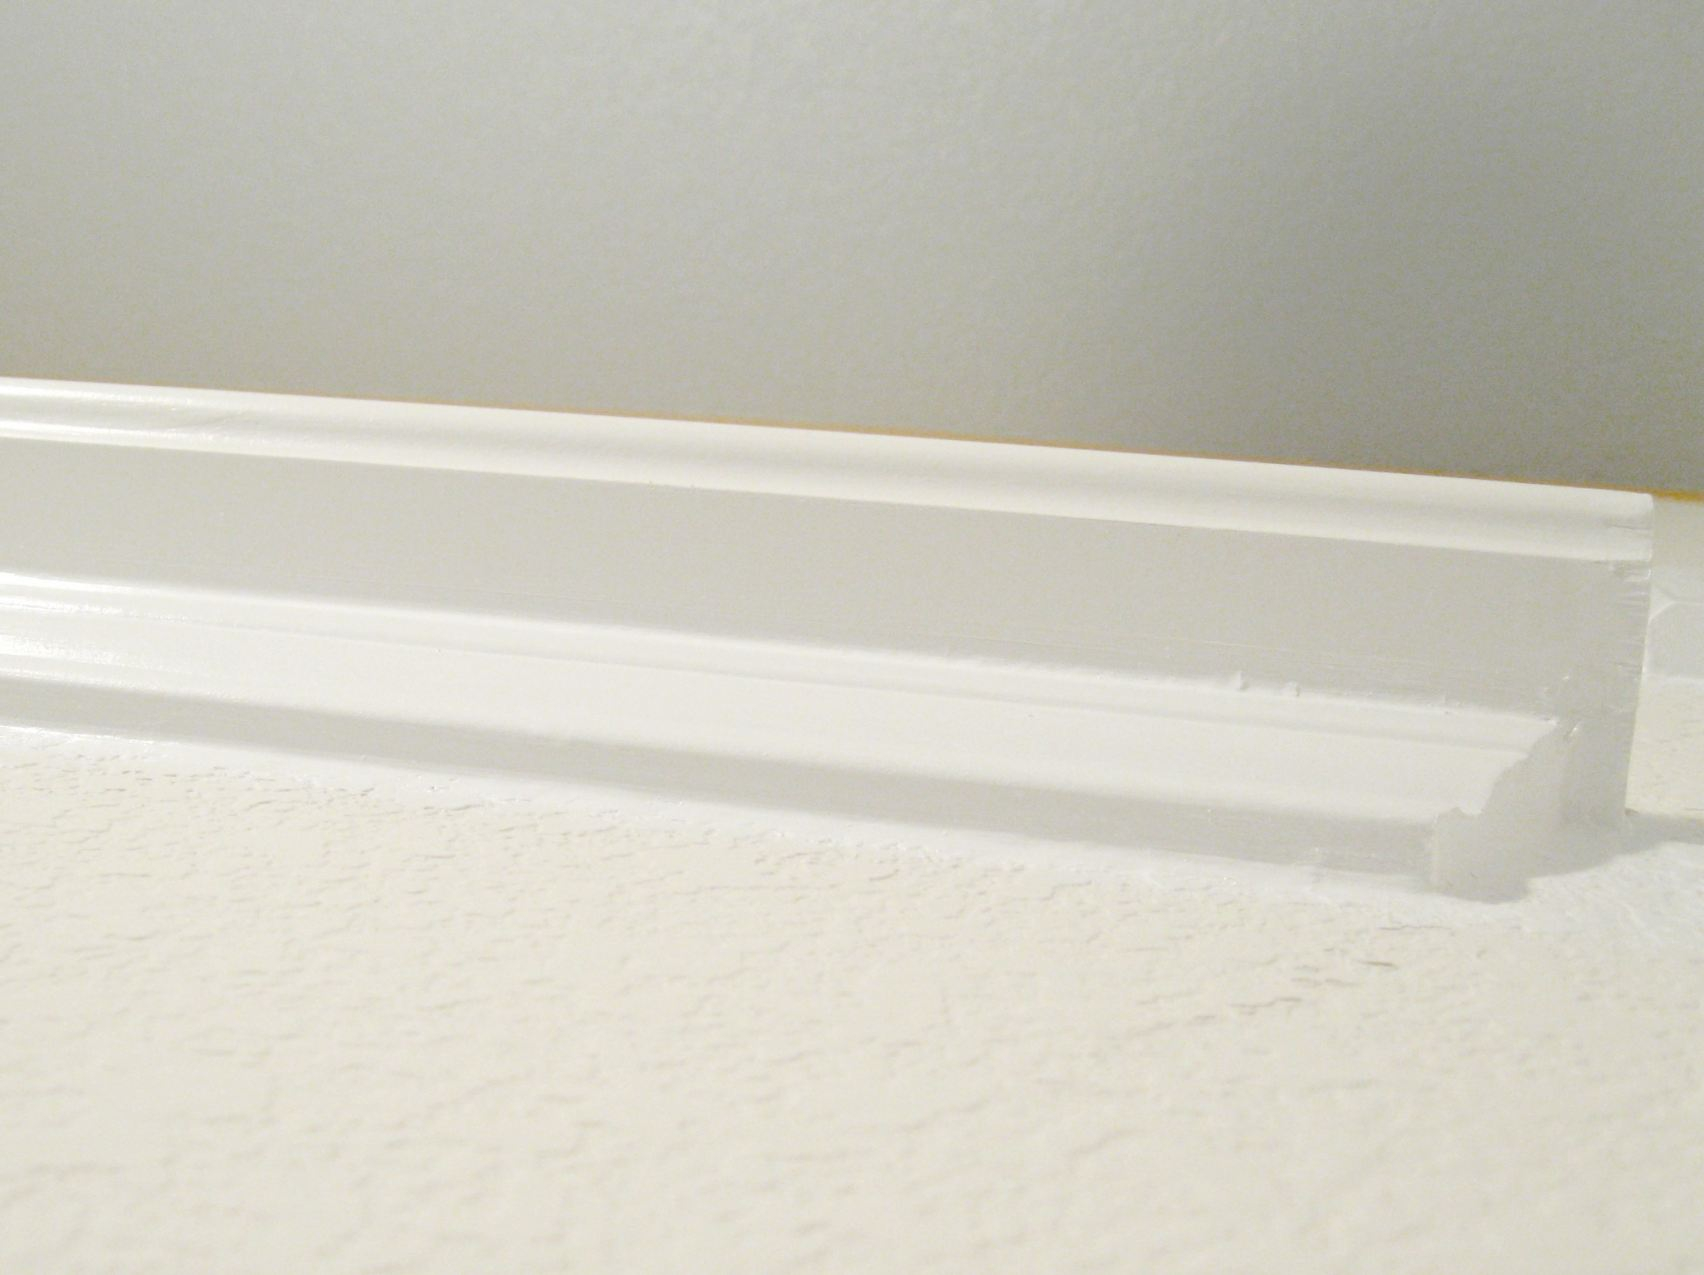 Full Image For Magic Bathtub Sealer Trim 54 Outstanding For Much in size 1704 X 1275